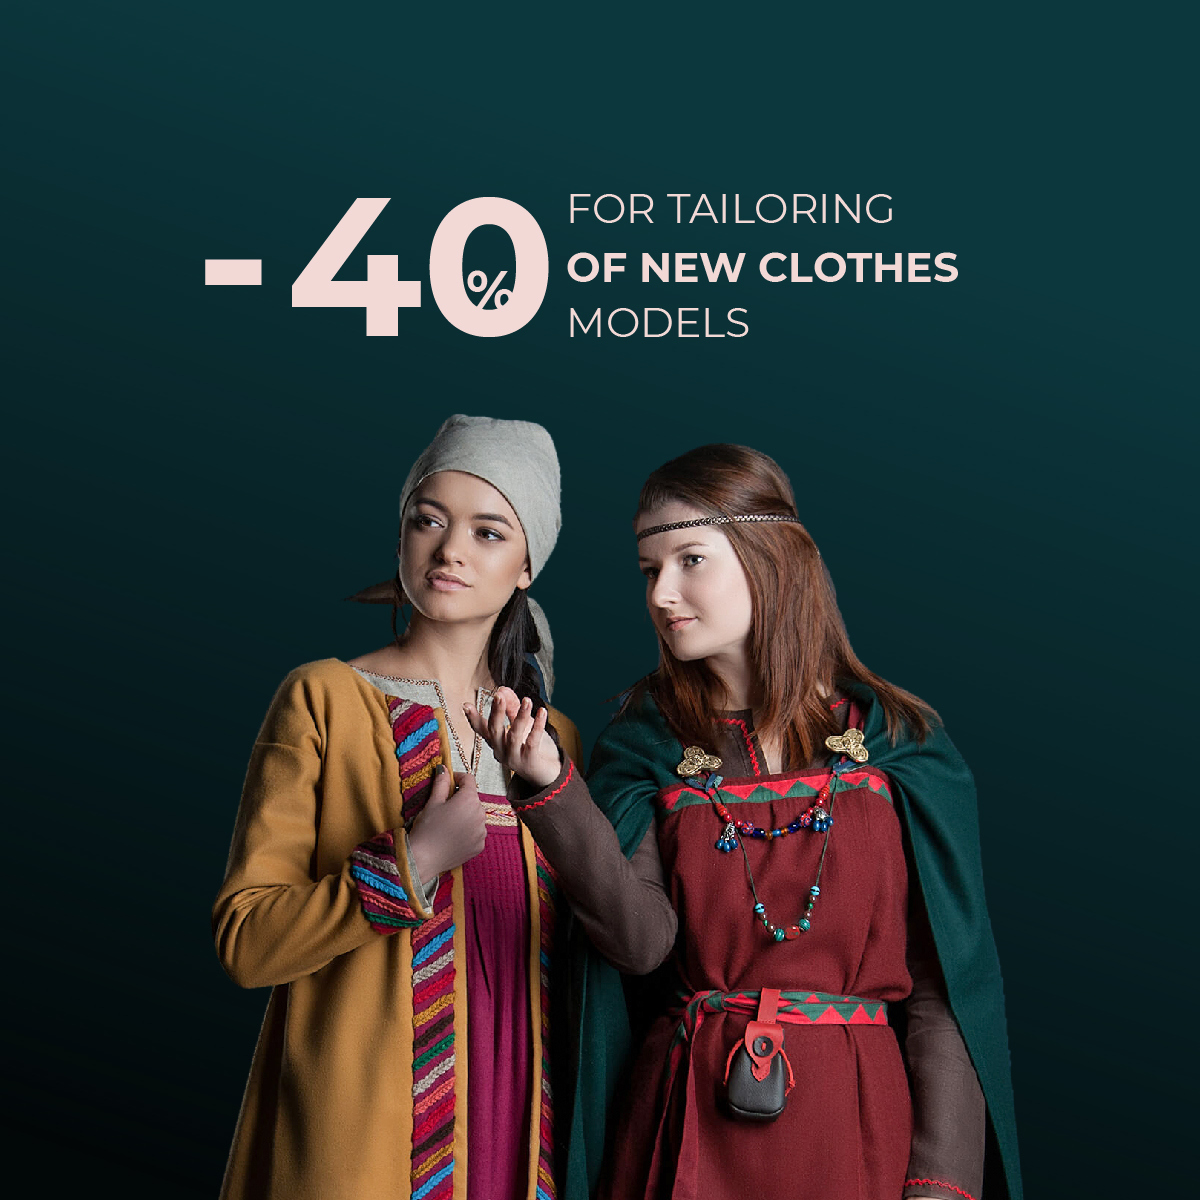 - 40% for tailoring of new clothes models! 